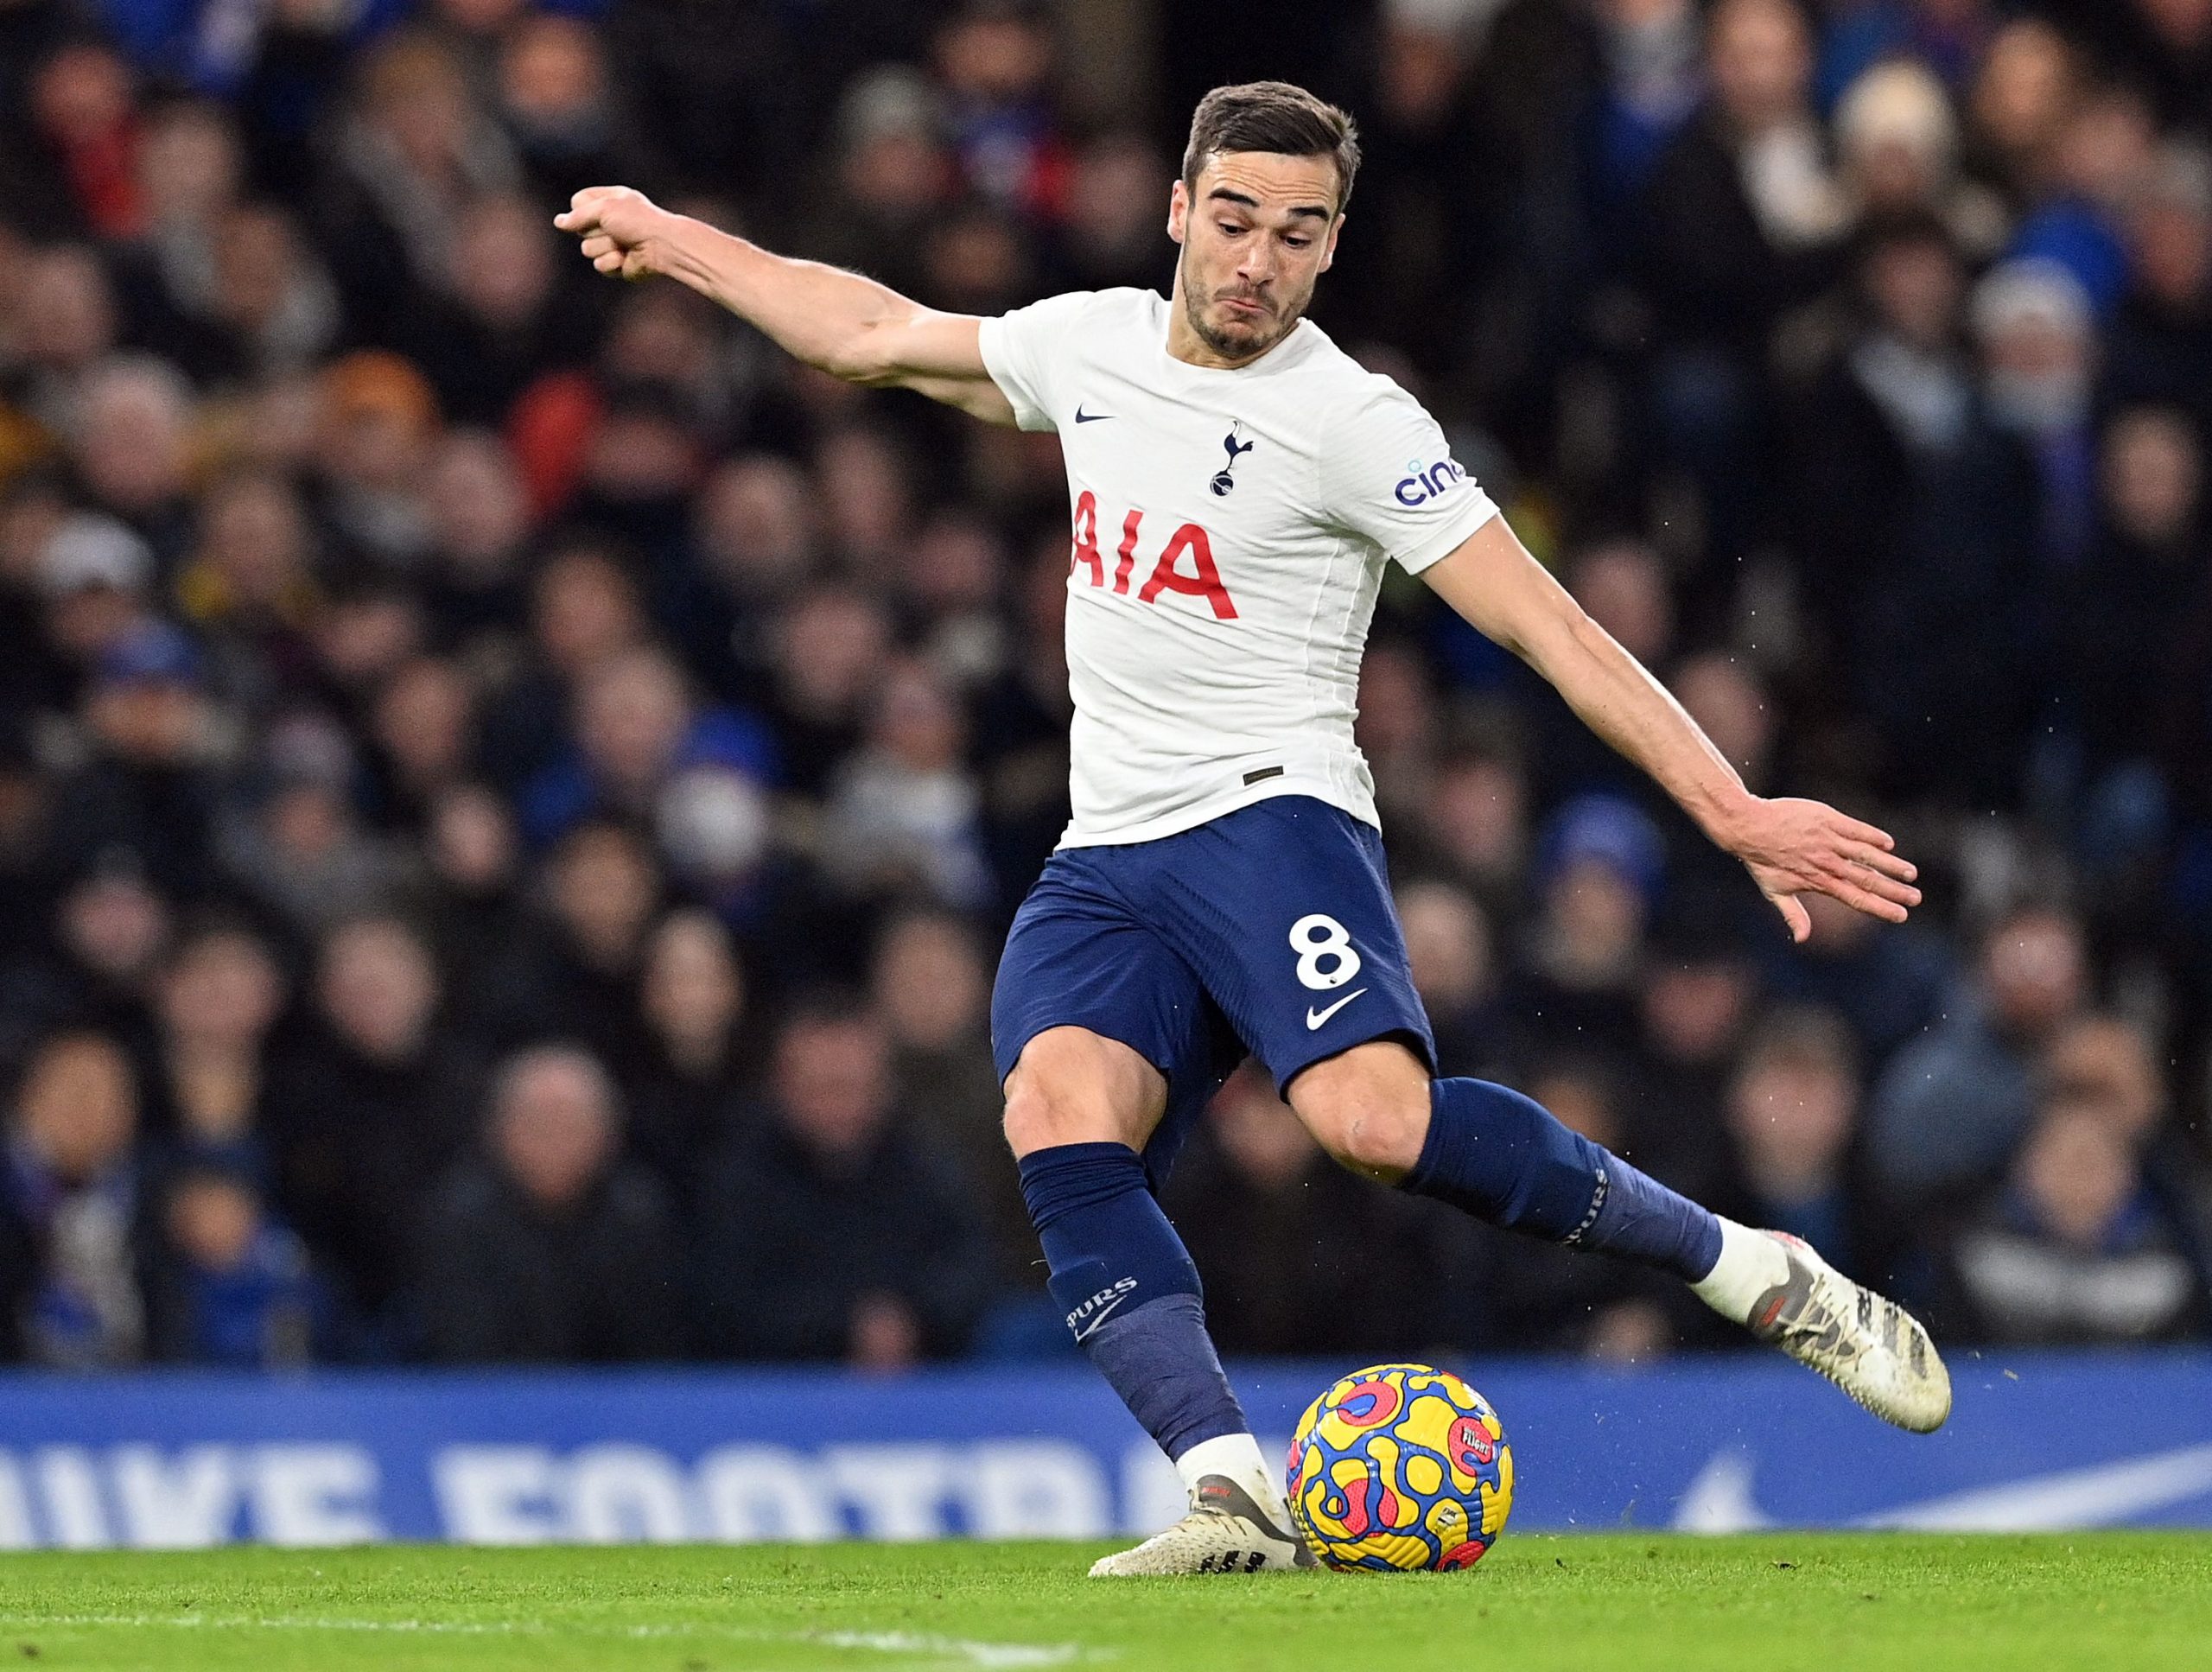 Harry Winks is expected to leave Tottenham this summer. (Photo by JUSTIN TALLIS/AFP via Getty Images)